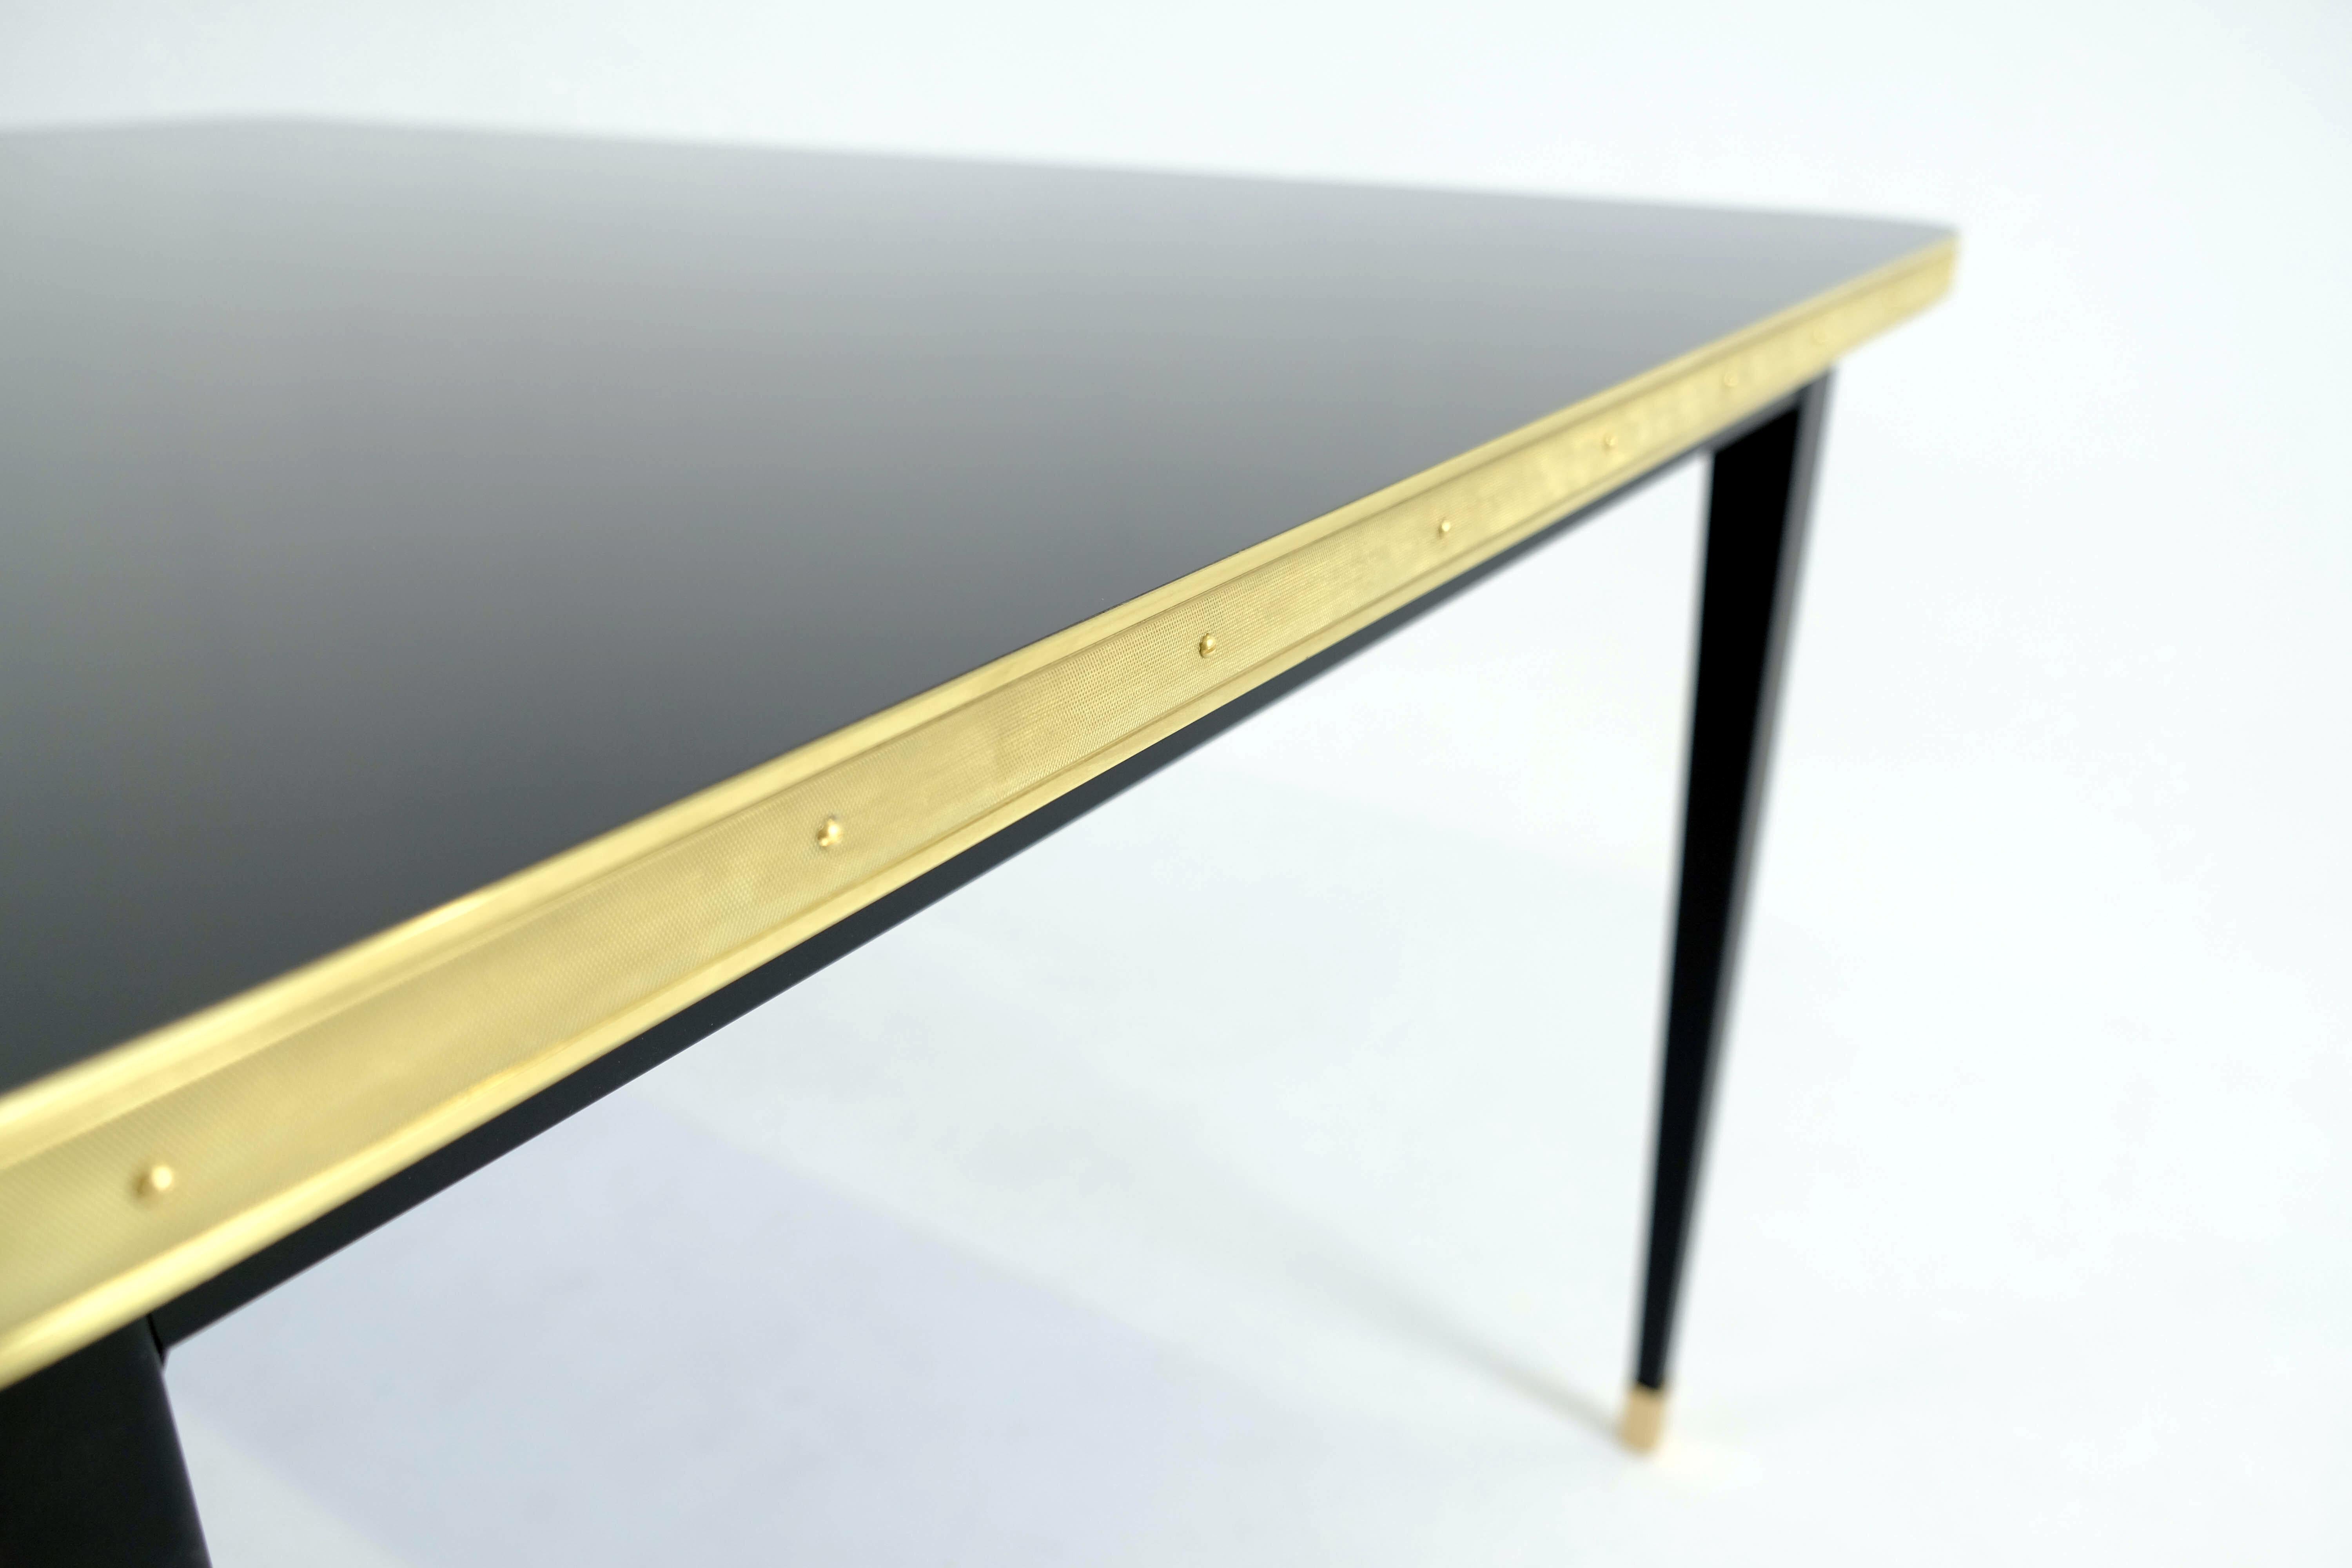 Spanish Dinning Table, High Gloss Laminate, Brass, Conic Legs, Navy Night Sea - S For Sale